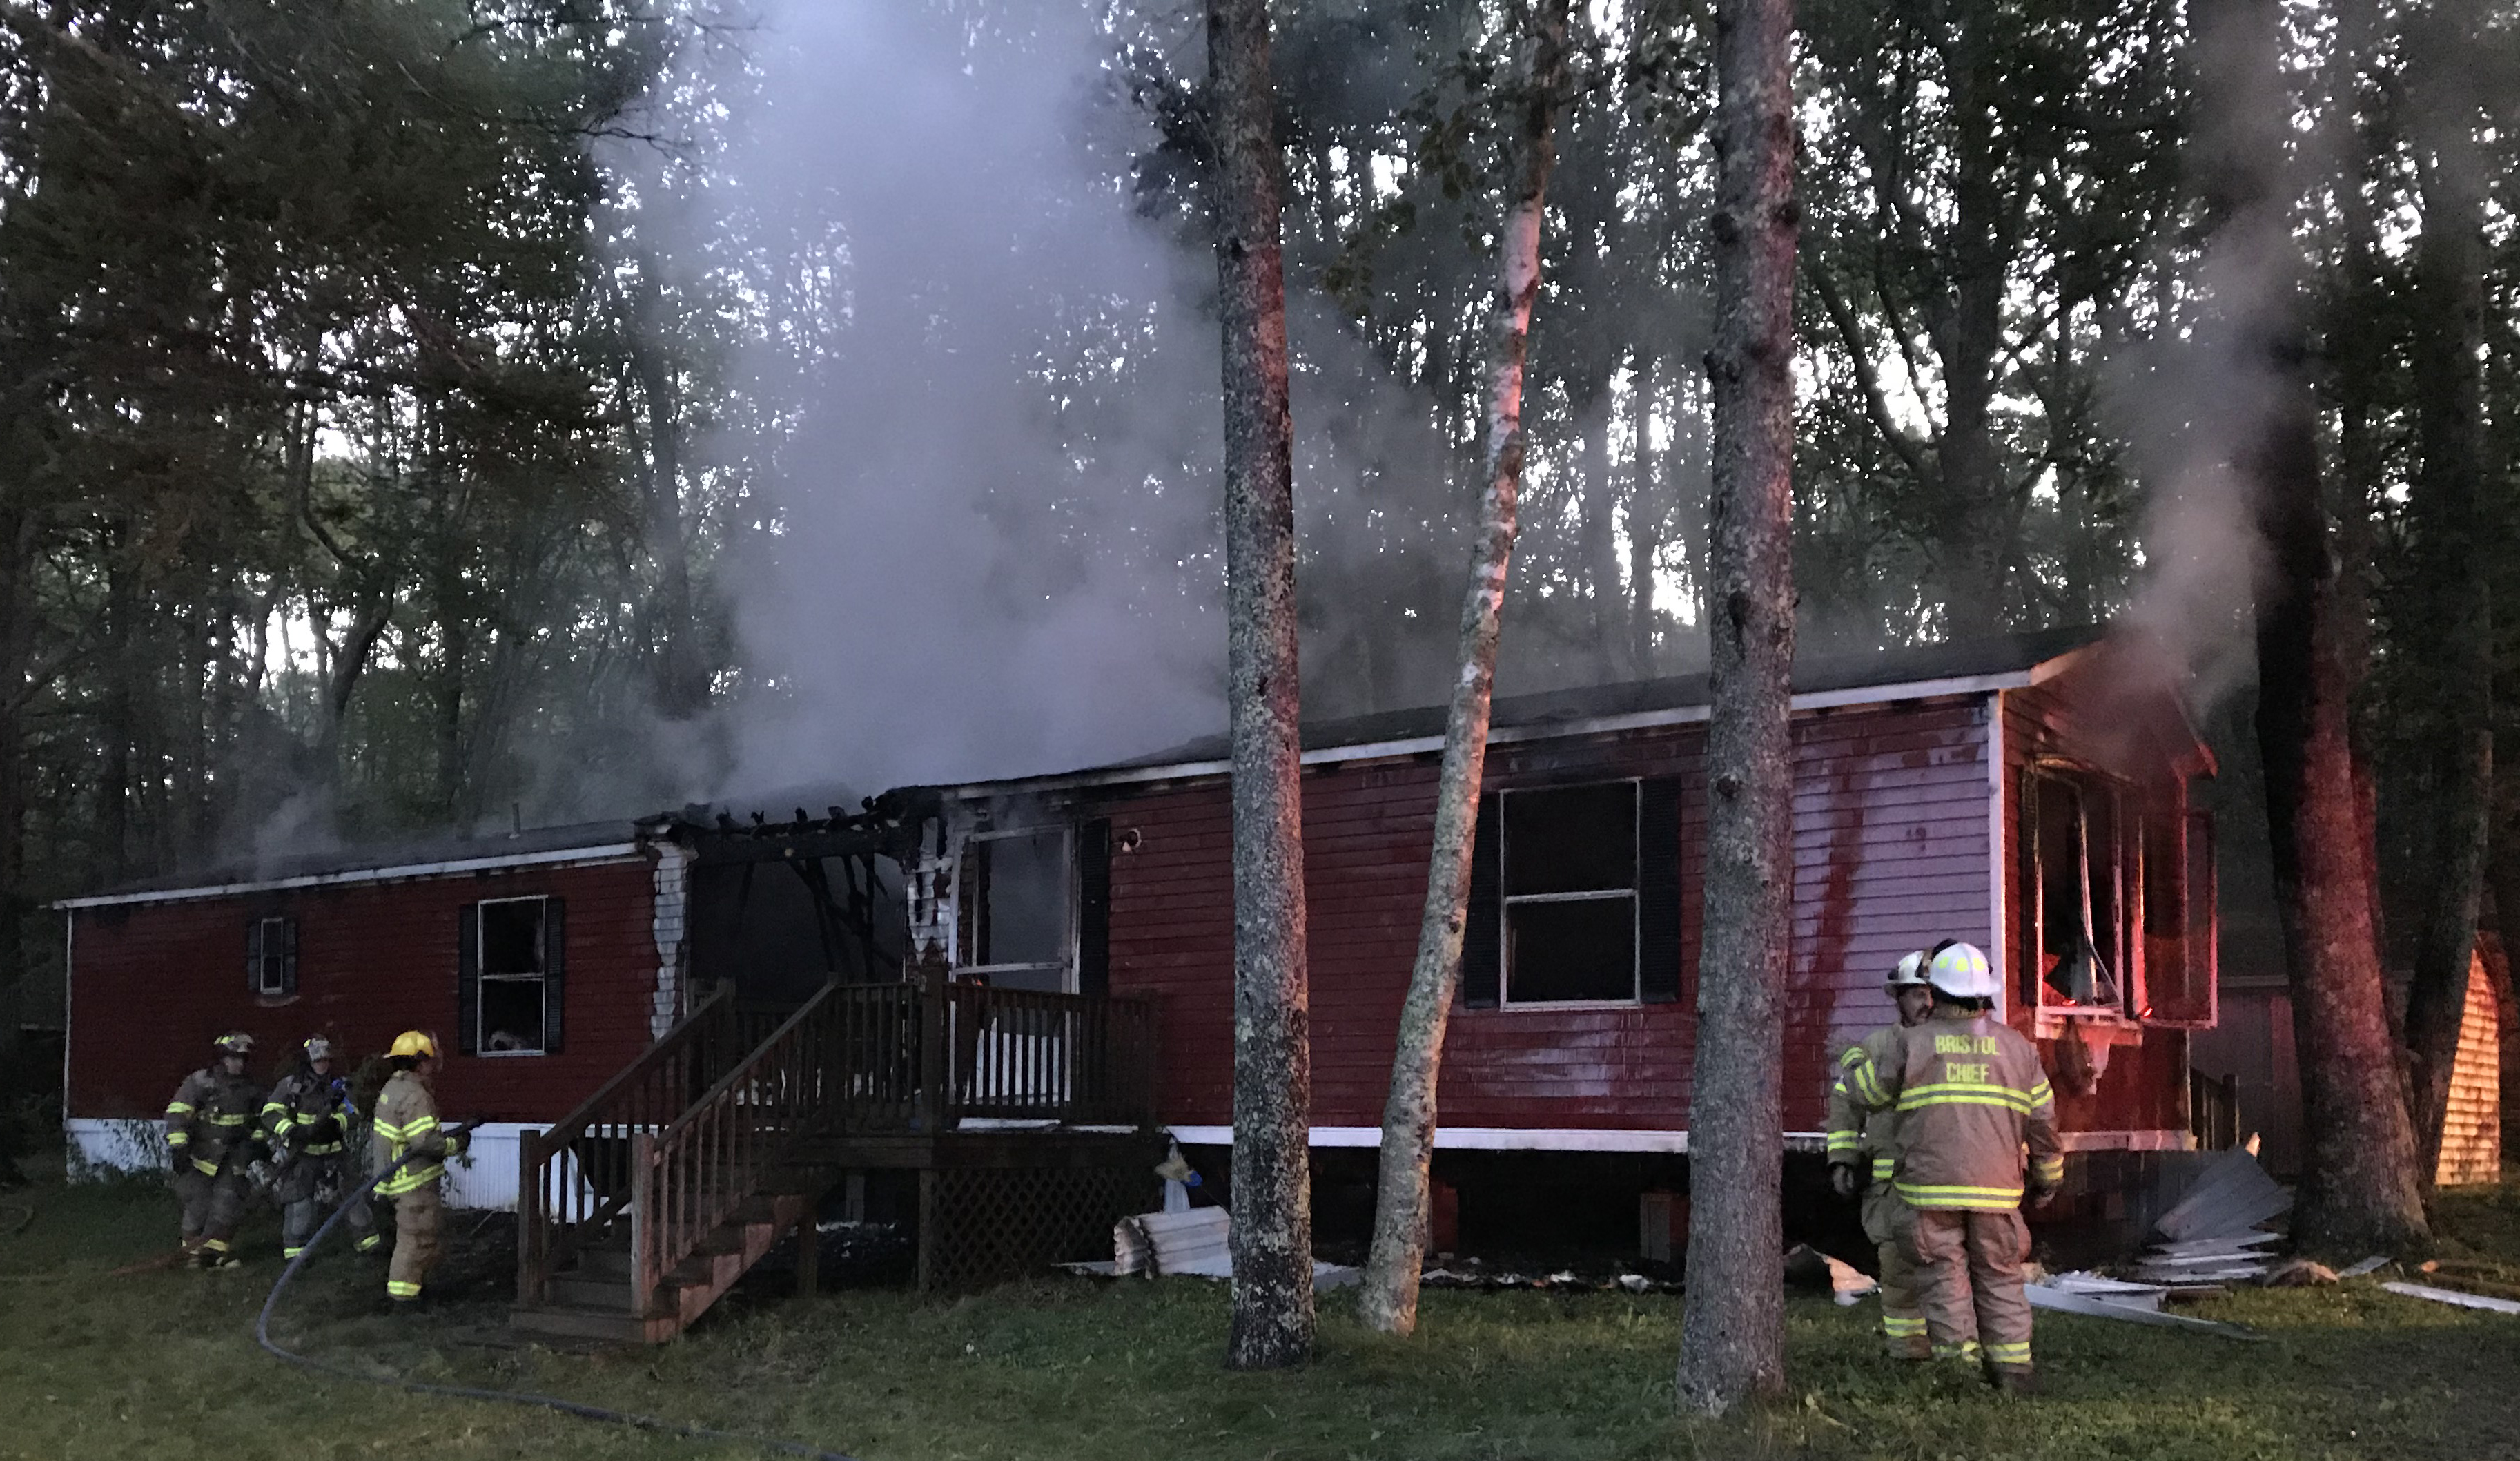 Firefighters cool down a smoldering mobile home at 3 Left Lane in Pemaquid early Monday, Aug. 26. The home was vacant, according to the fire chief. (J.W. Oliver photo)